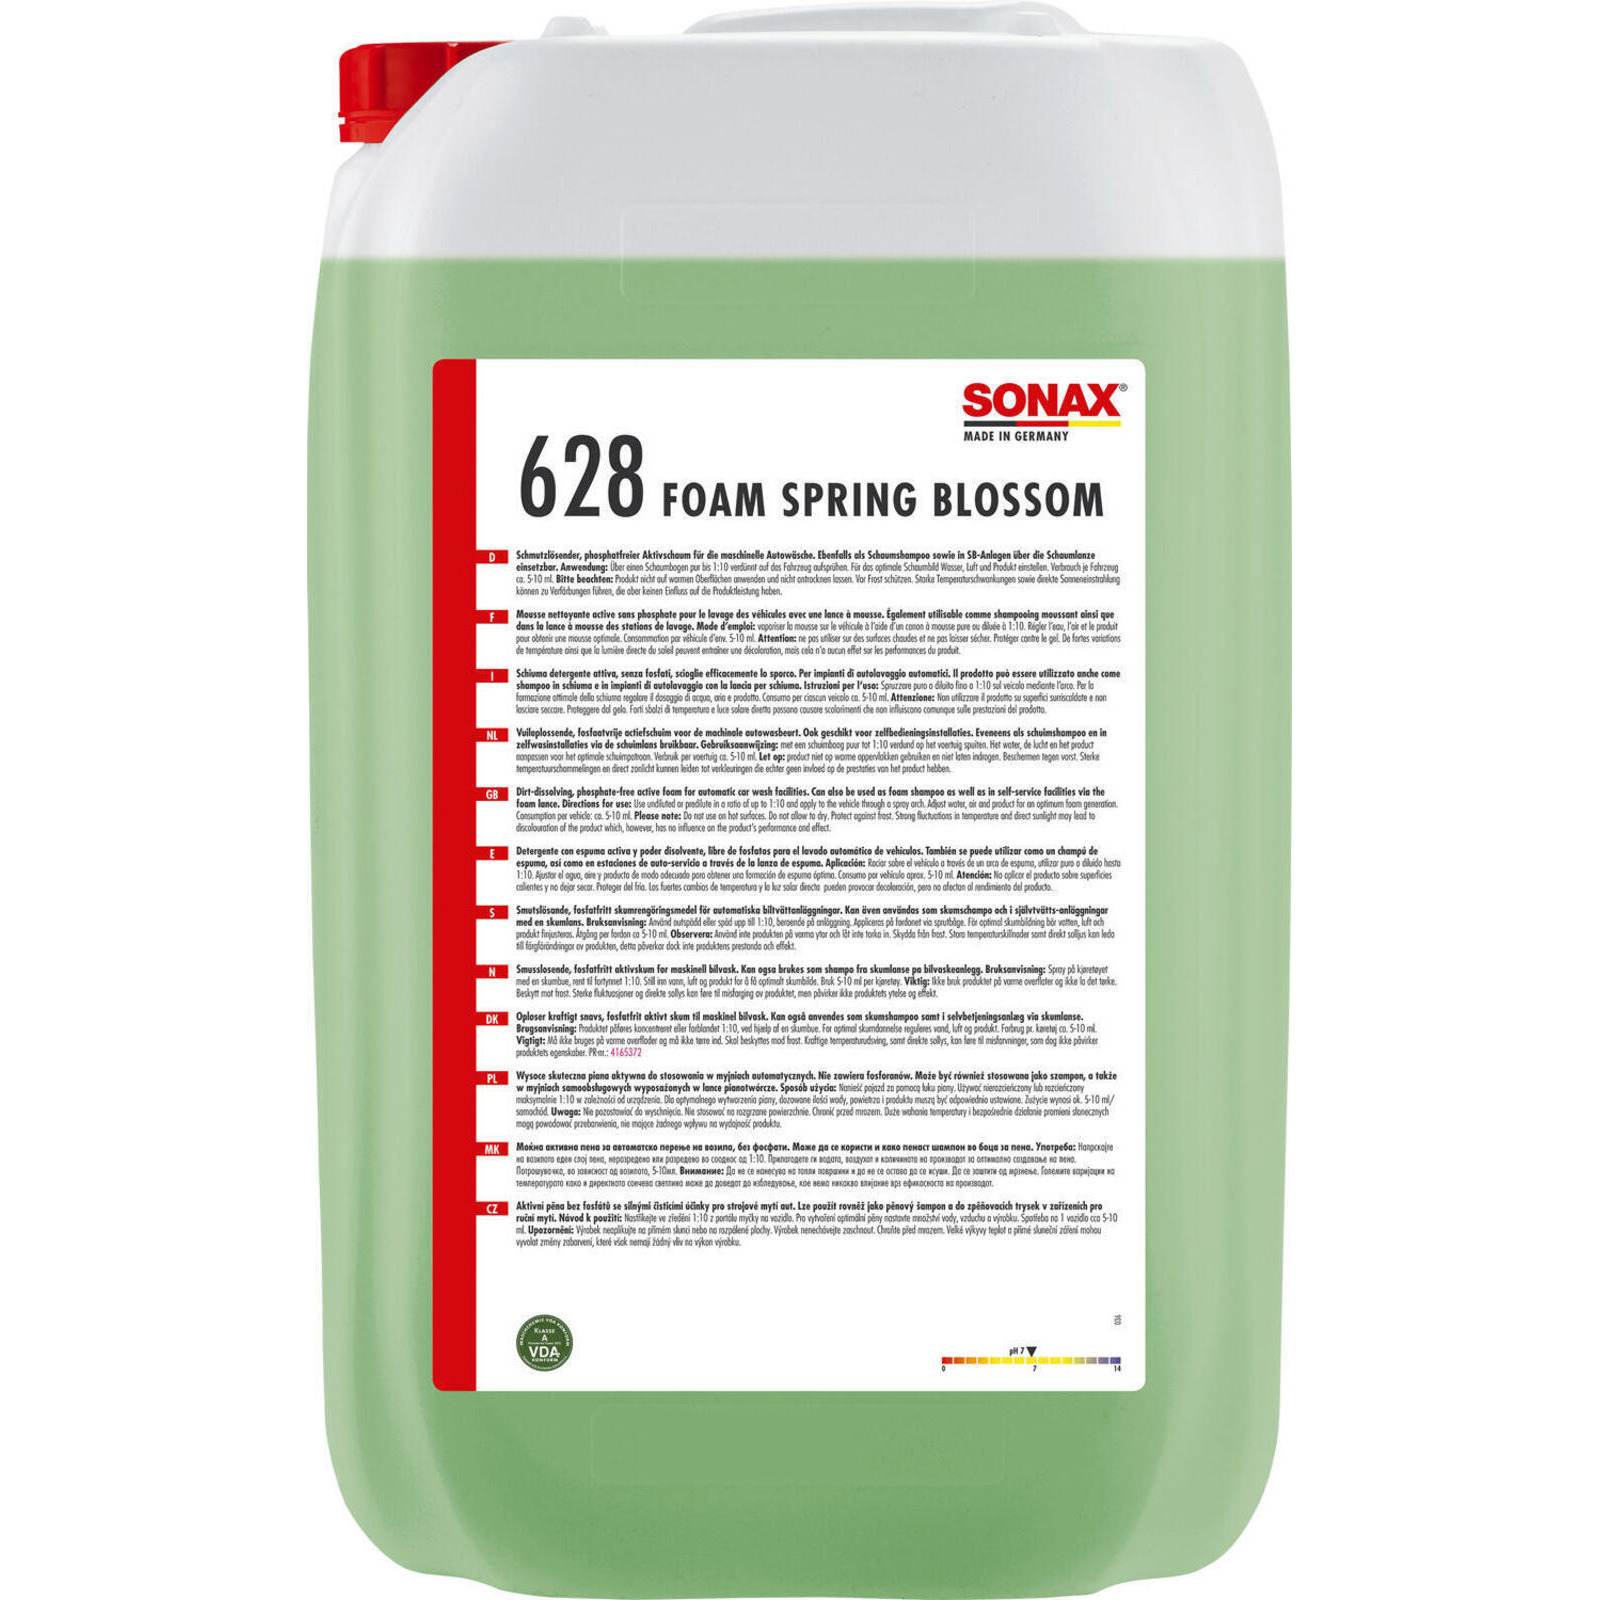 SONAX Paint Cleaner Foam Spring Blossom